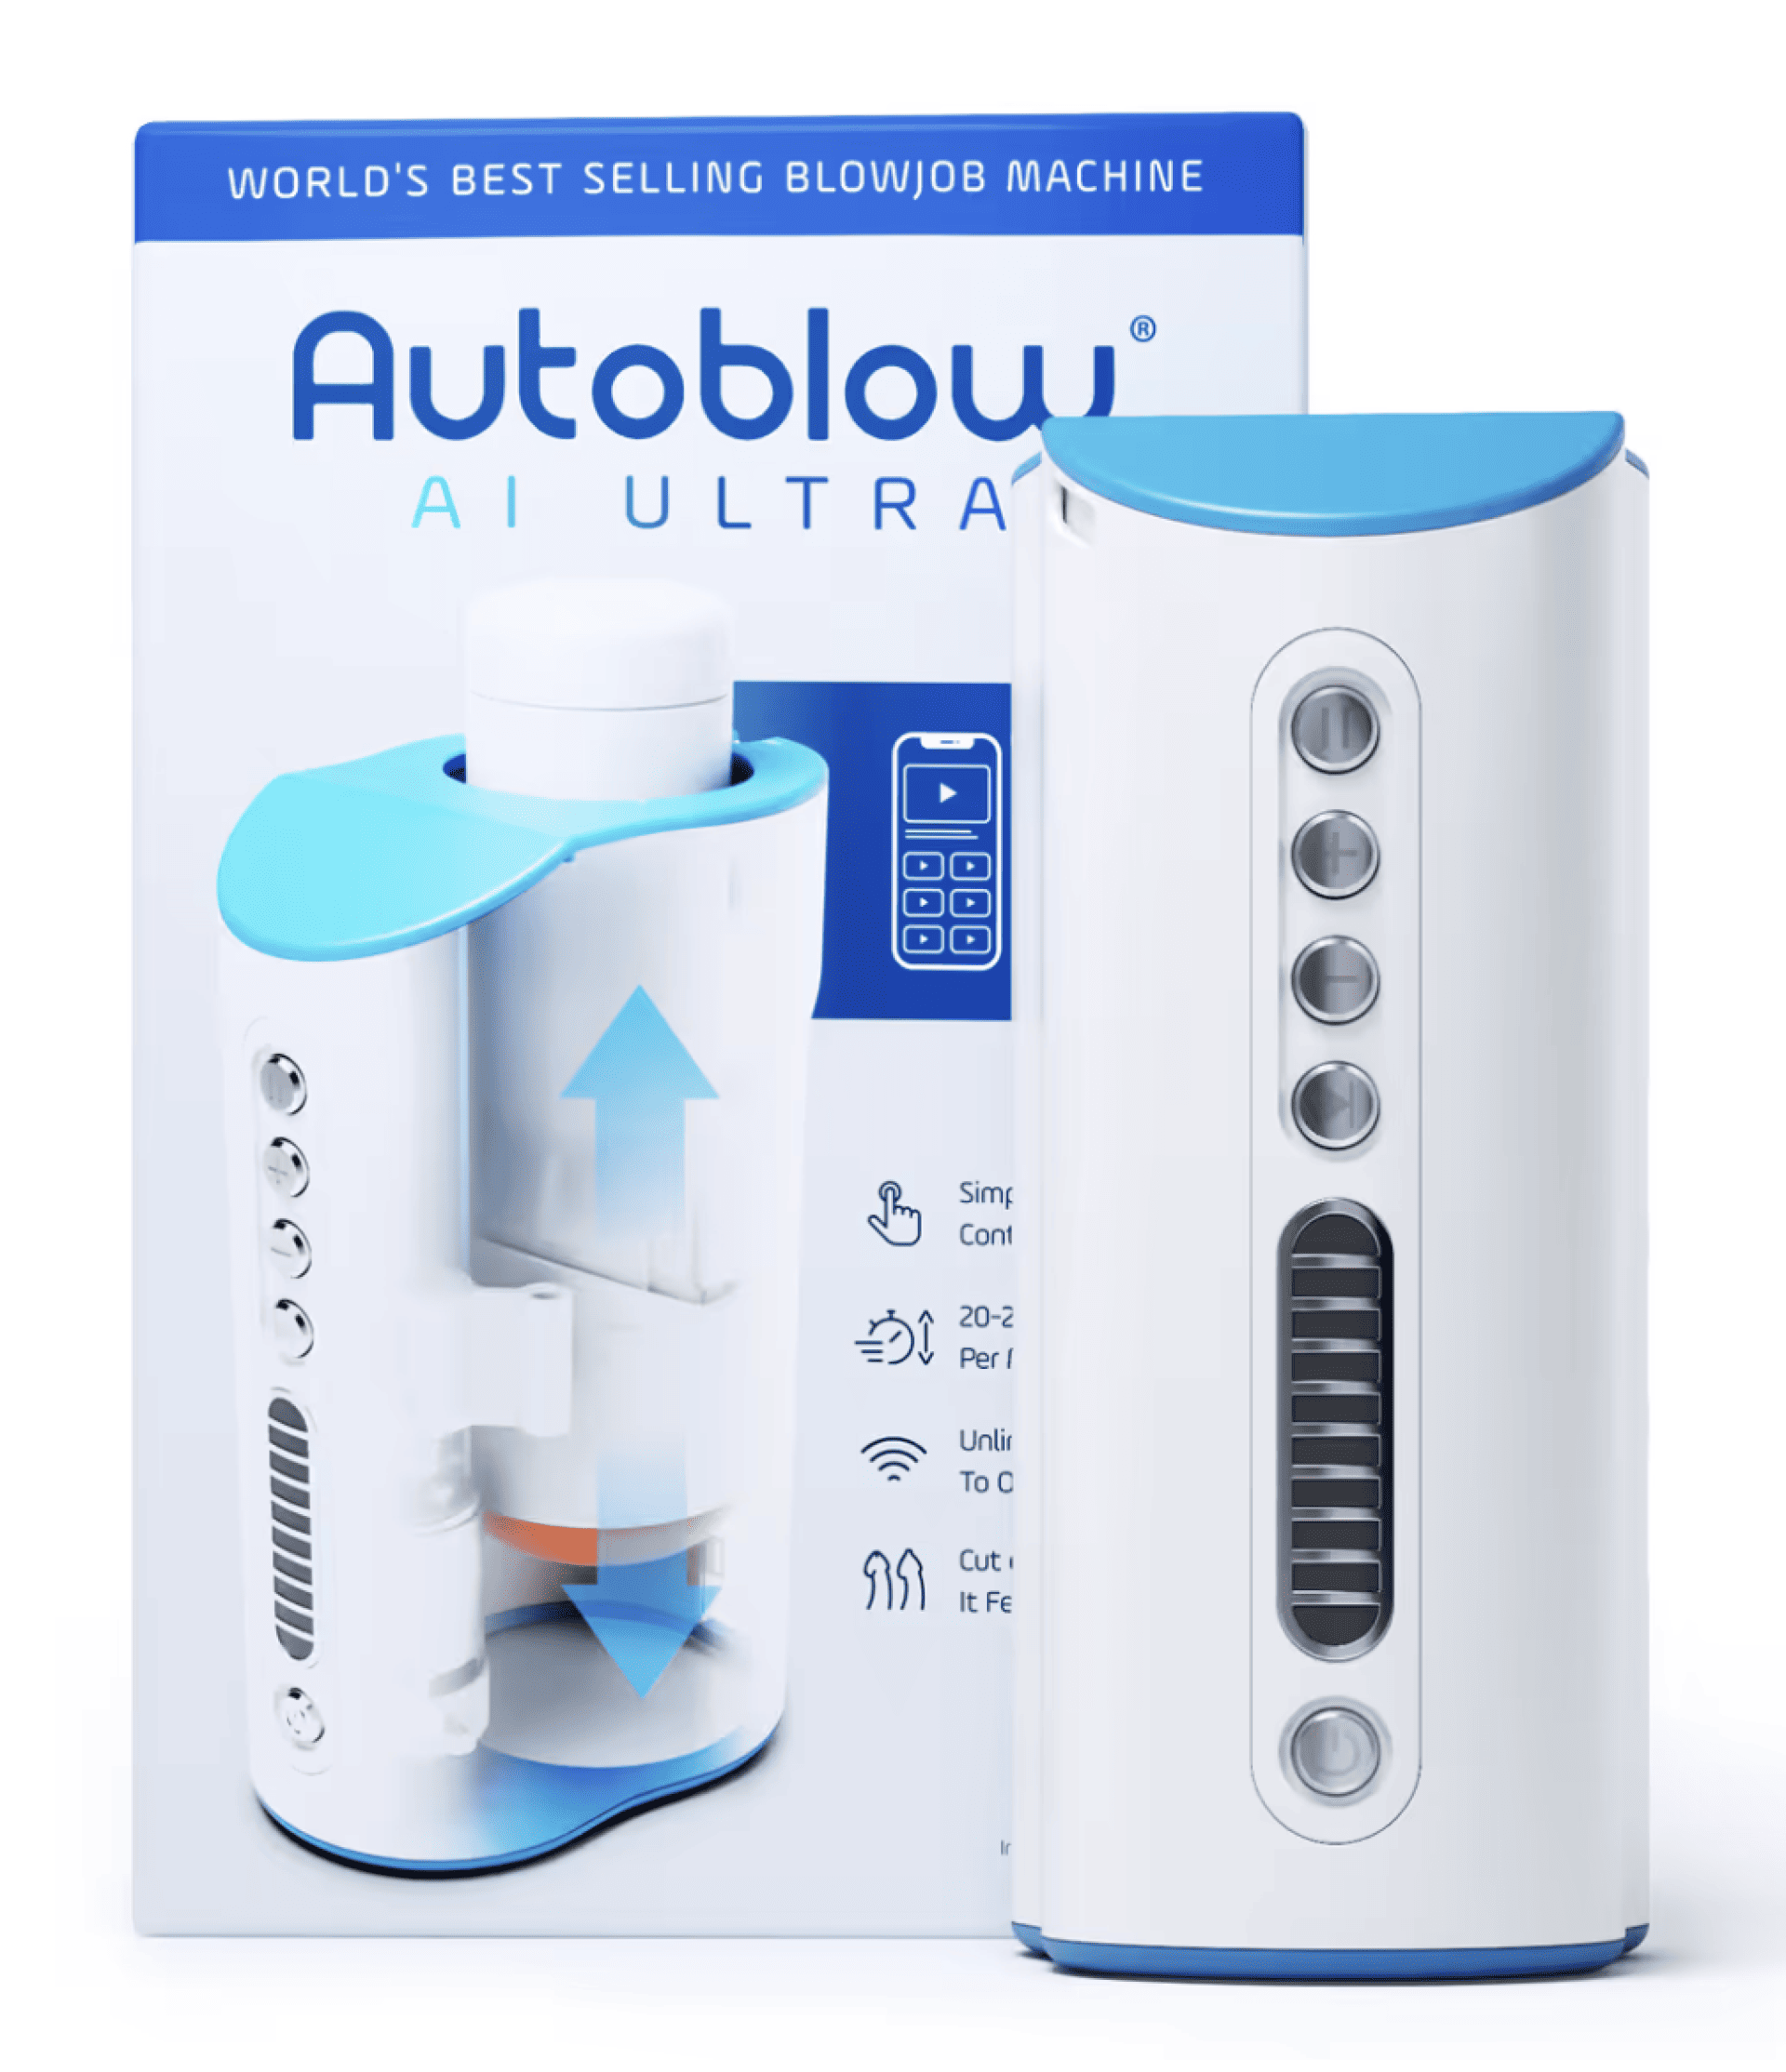 The Autoblow AI Ultra is an innovative air purifier that provides automatic blow functionality for enhanced comfort and freshness.